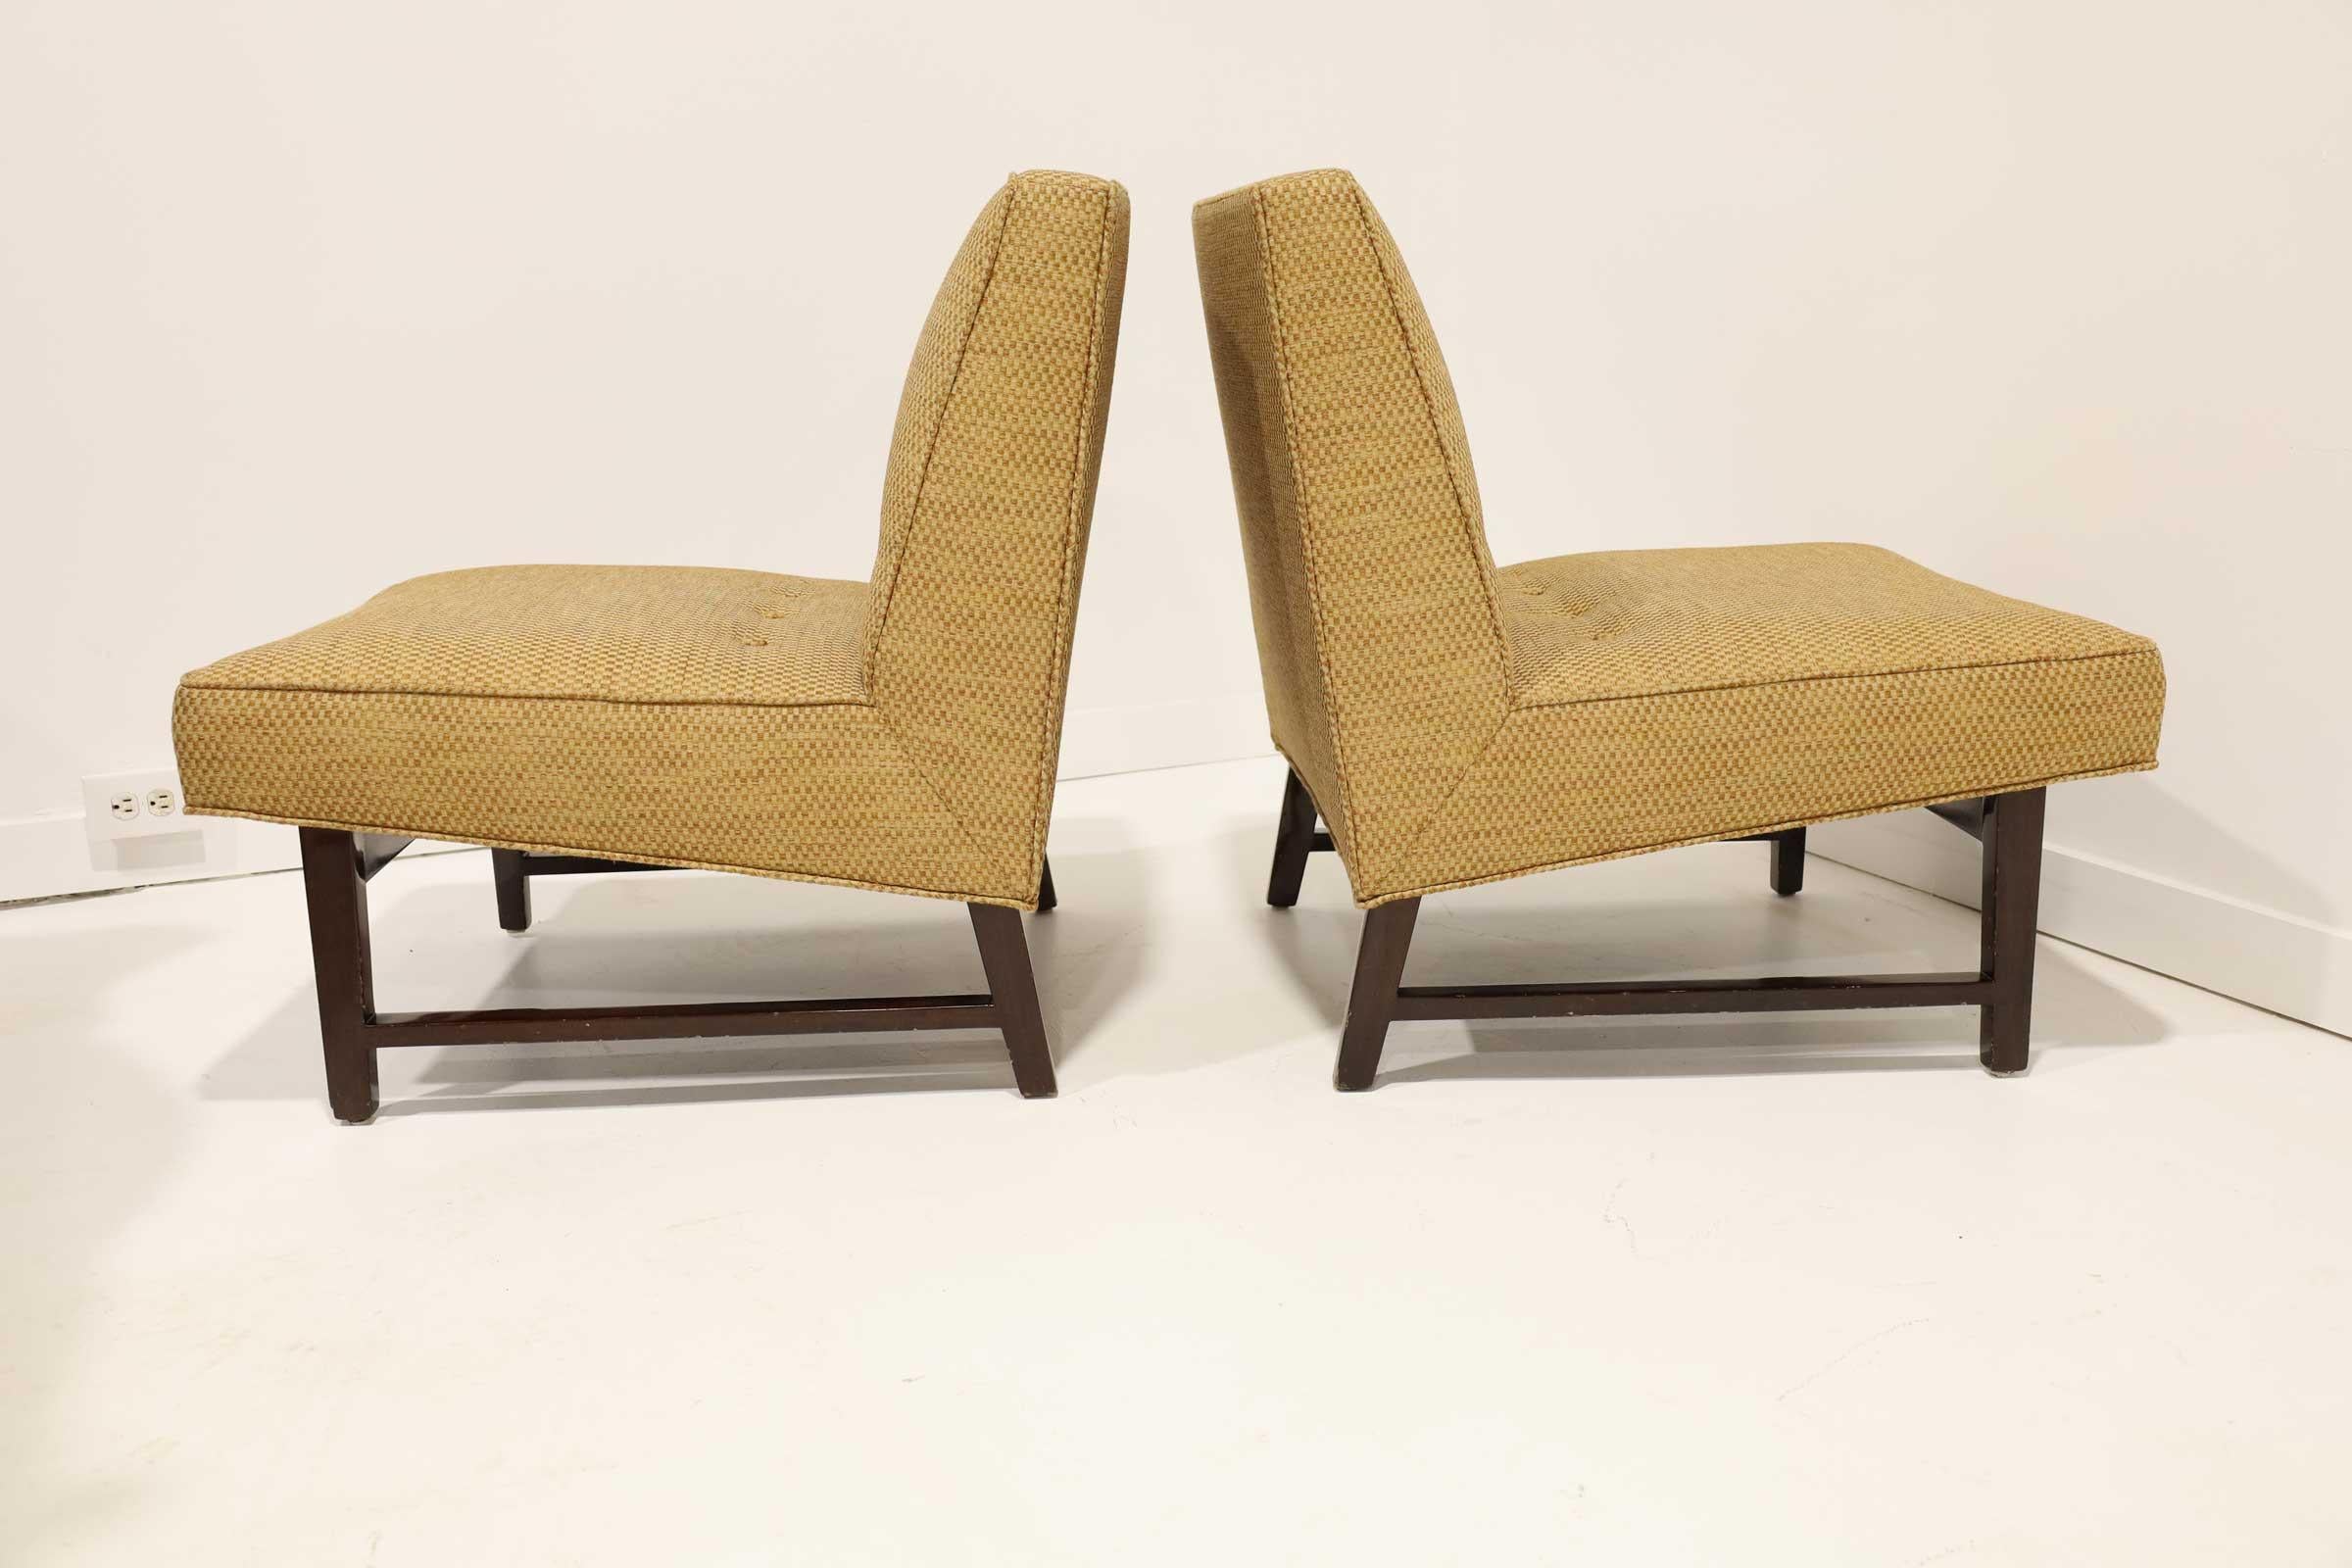 20th Century Pair of Edward Wormley for Dunbar Slipper Chairs in Gold Color Upholstery